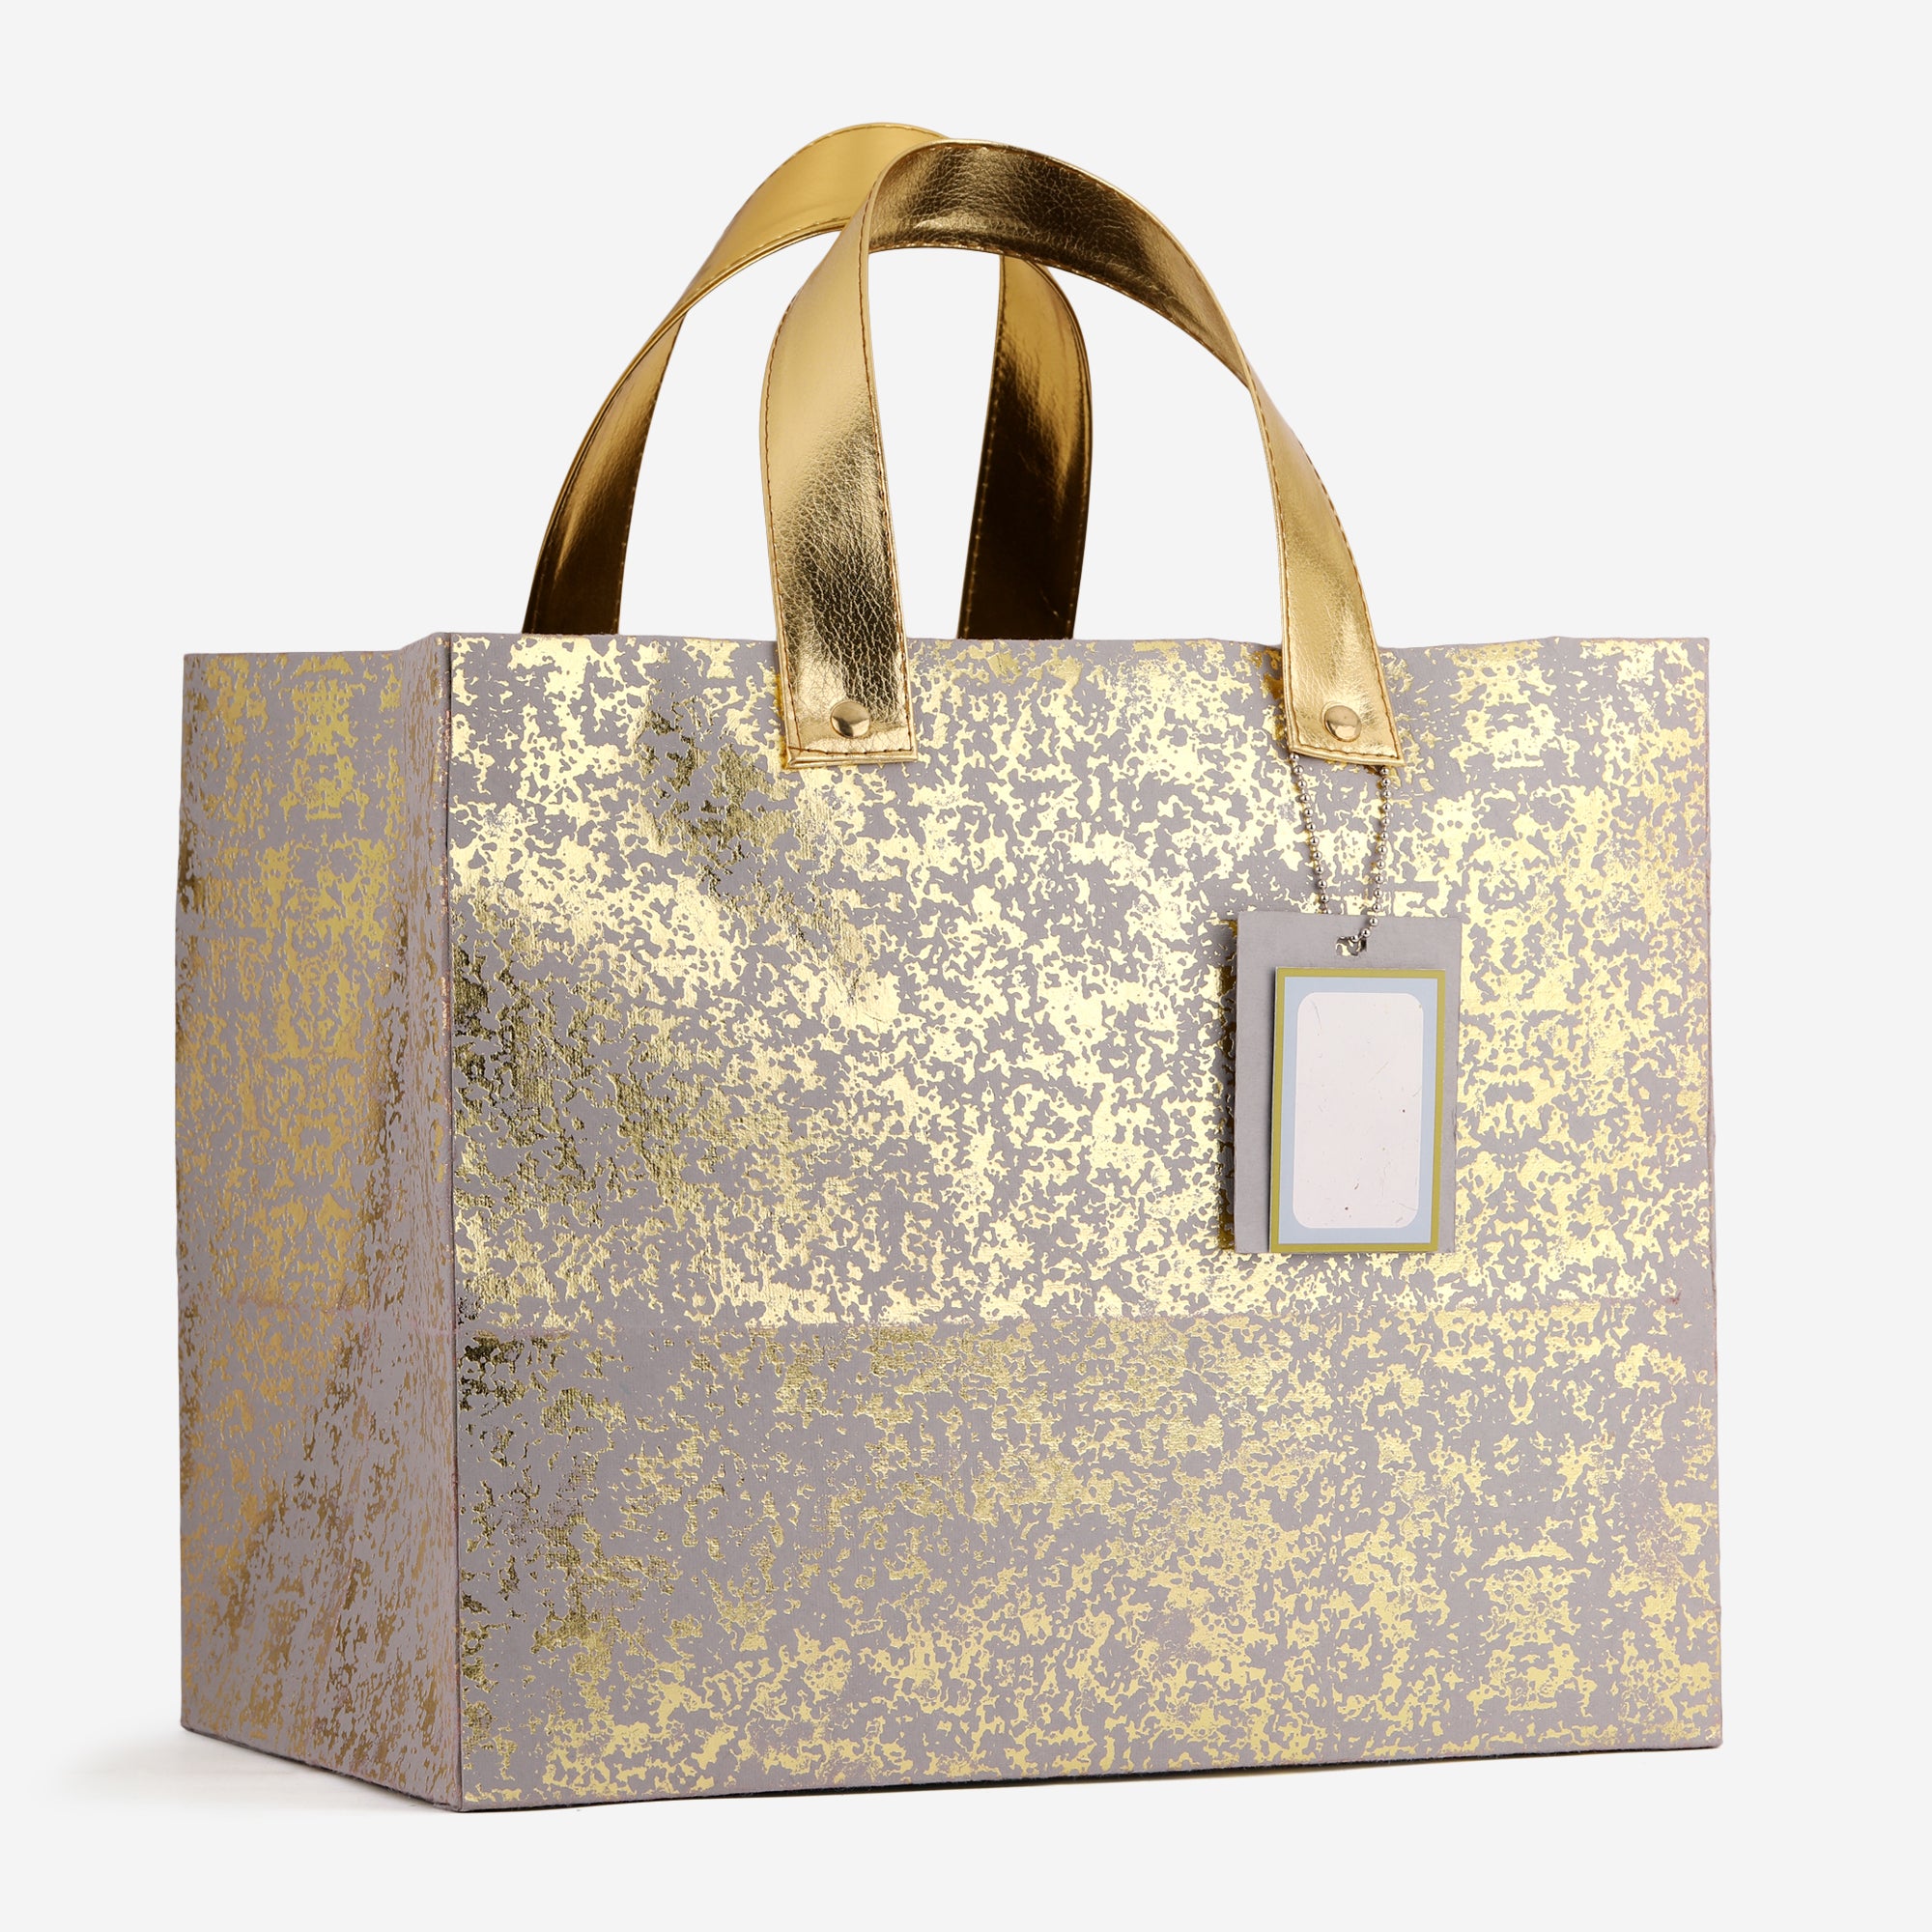 Buy Gold Handbags for Women by TOMMY HILFIGER Online | Ajio.com